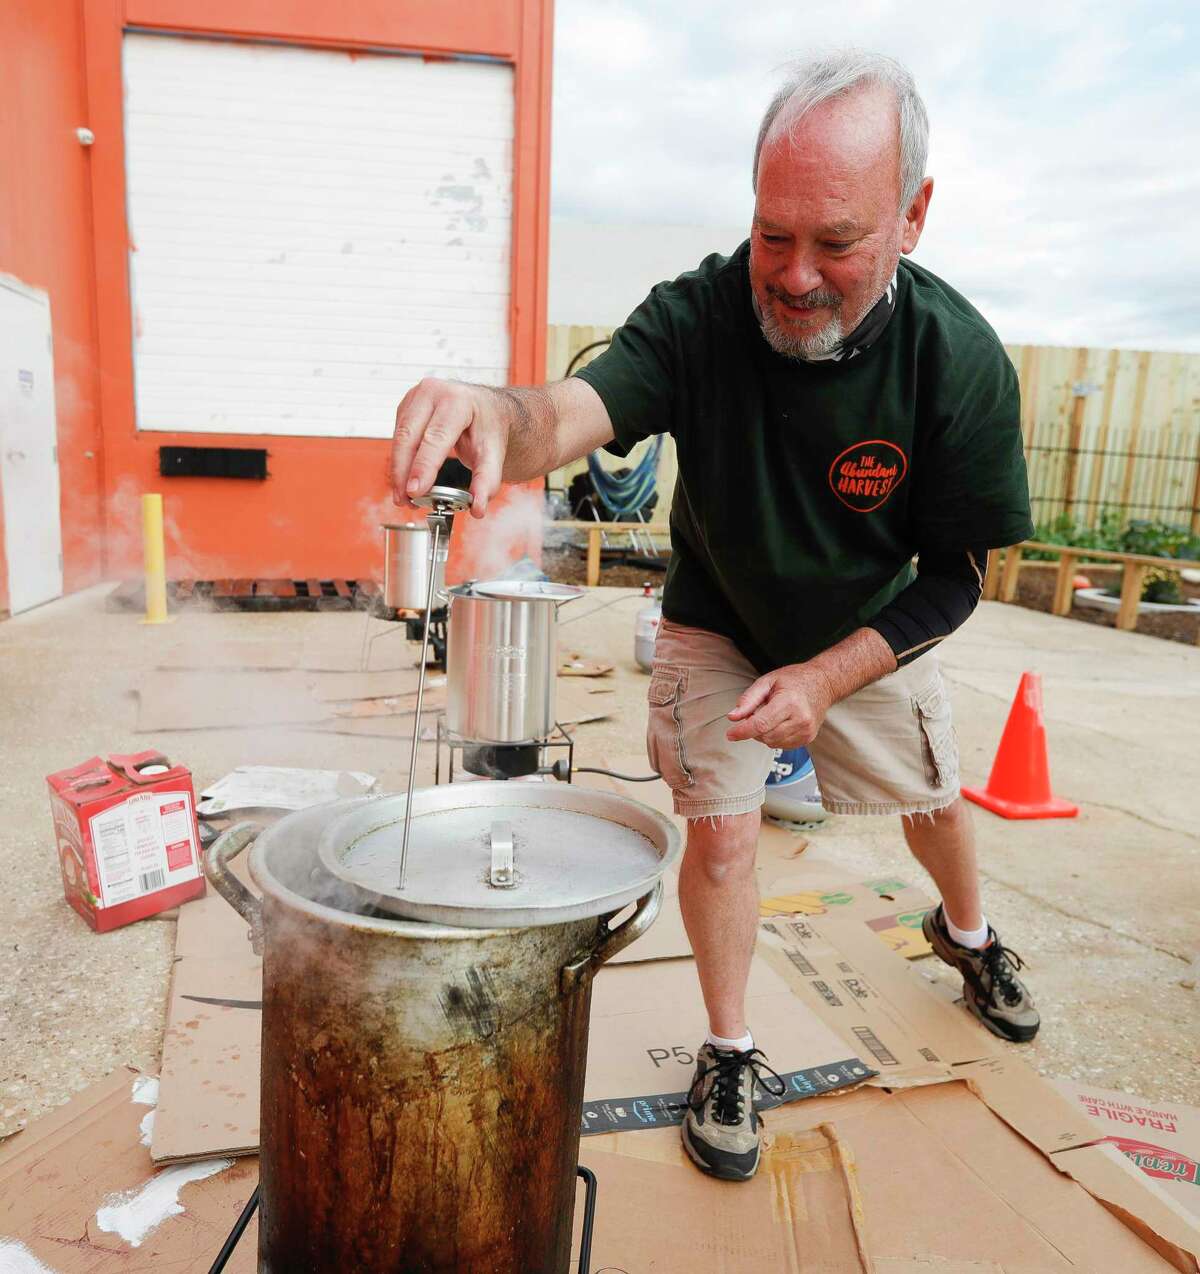 Paul McKelvey checks the temperatures as he helps fry 30 turkeys at The Abundant Harvest, Wednesday, Nov. 25, 2020, in Spring. Saint Isidore Episcopal Church hosted a turkey fry fundraiser and recently opened its cafe to company the organziation’s kitchen and food pantry outreach.